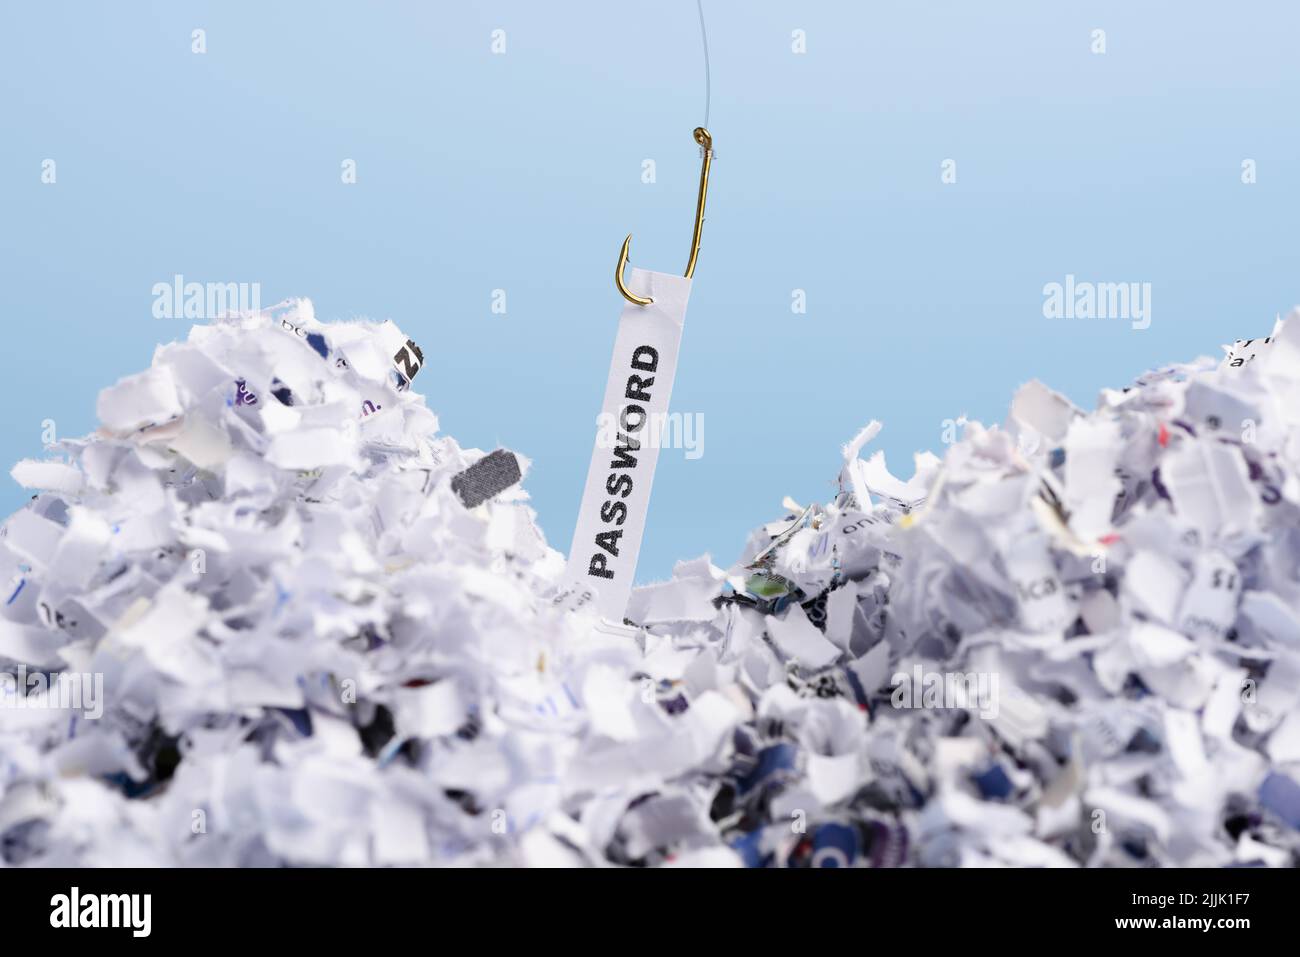 Password hooked on fishing hook pulled from pile of shredded documents on blue background Stock Photo